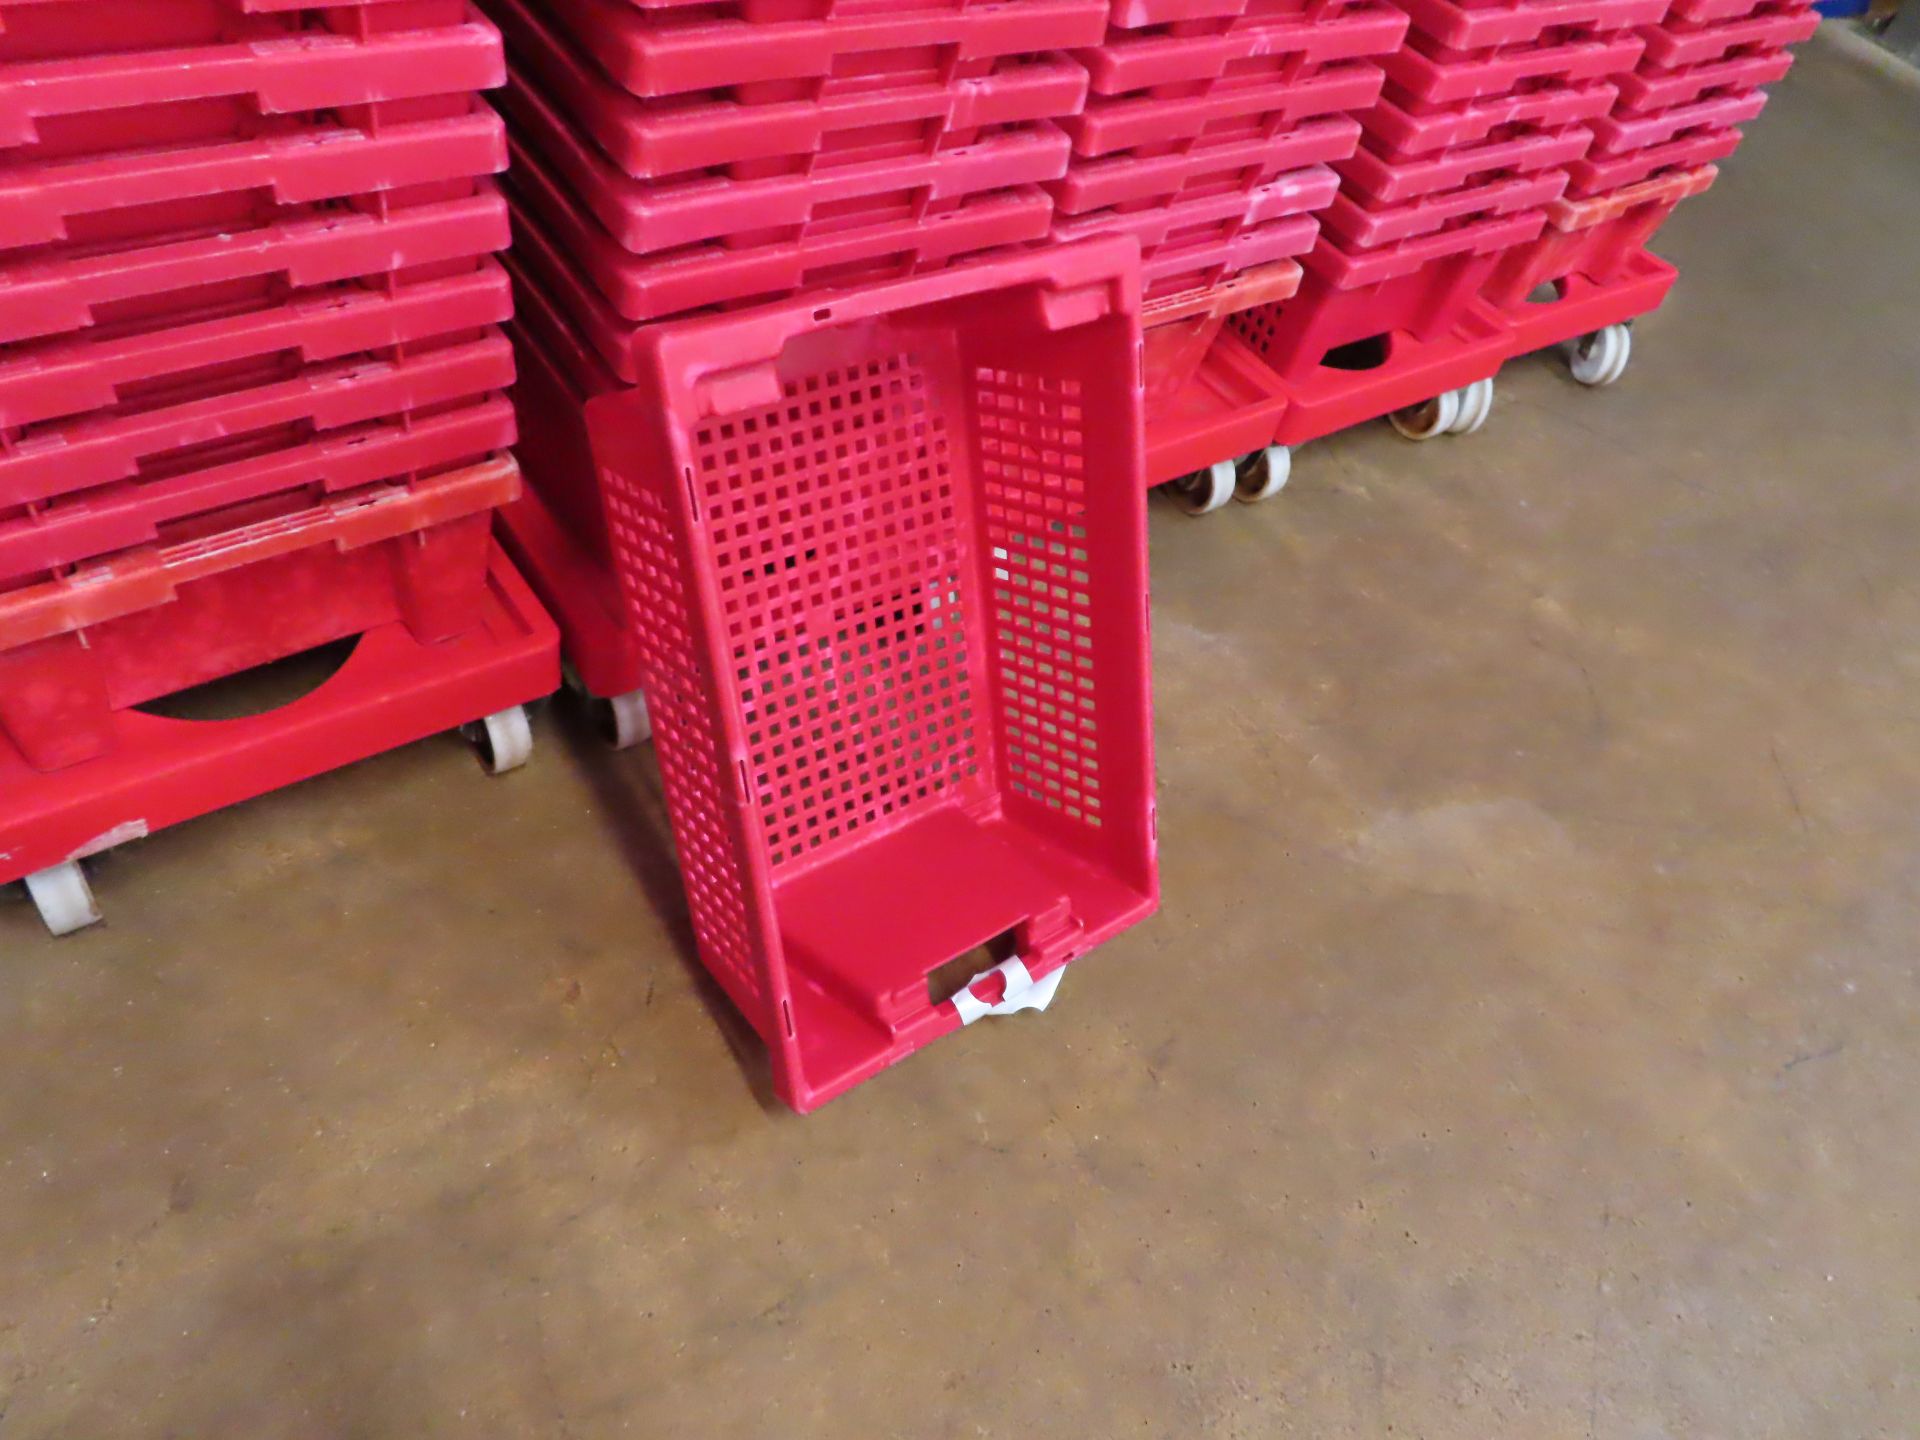 5 X DOLLIES HOLDING 30 OF RED PERFORATED TRAYS per dollie. 150 tray - Image 2 of 2